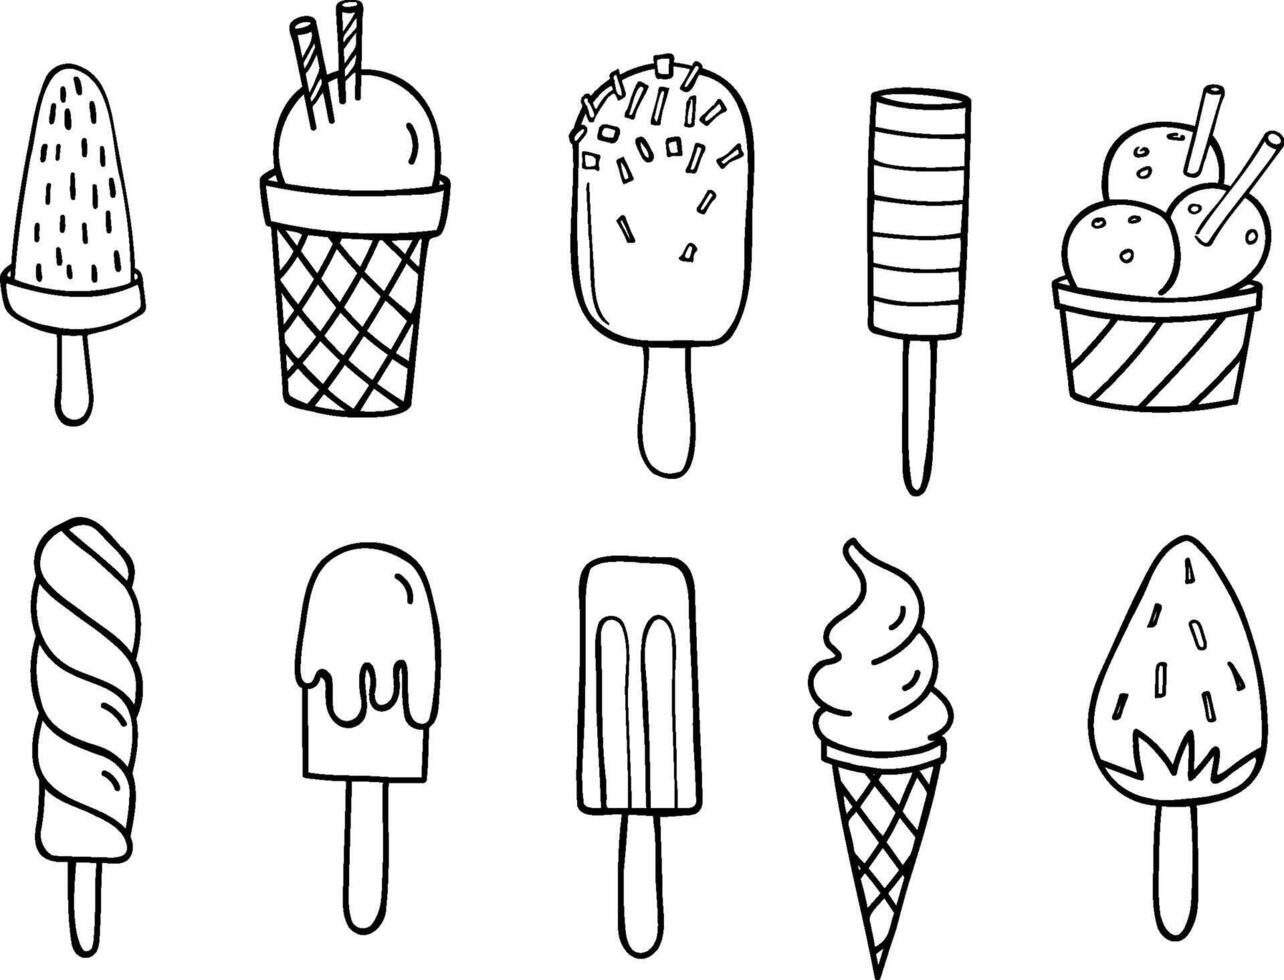 Ice Cream hand drawn ink sketch. Set with different kind sweets dessert, line art graphic. illustration isolated on background. Design for label, logo, poster, card, flyer, sign, print, paper vector